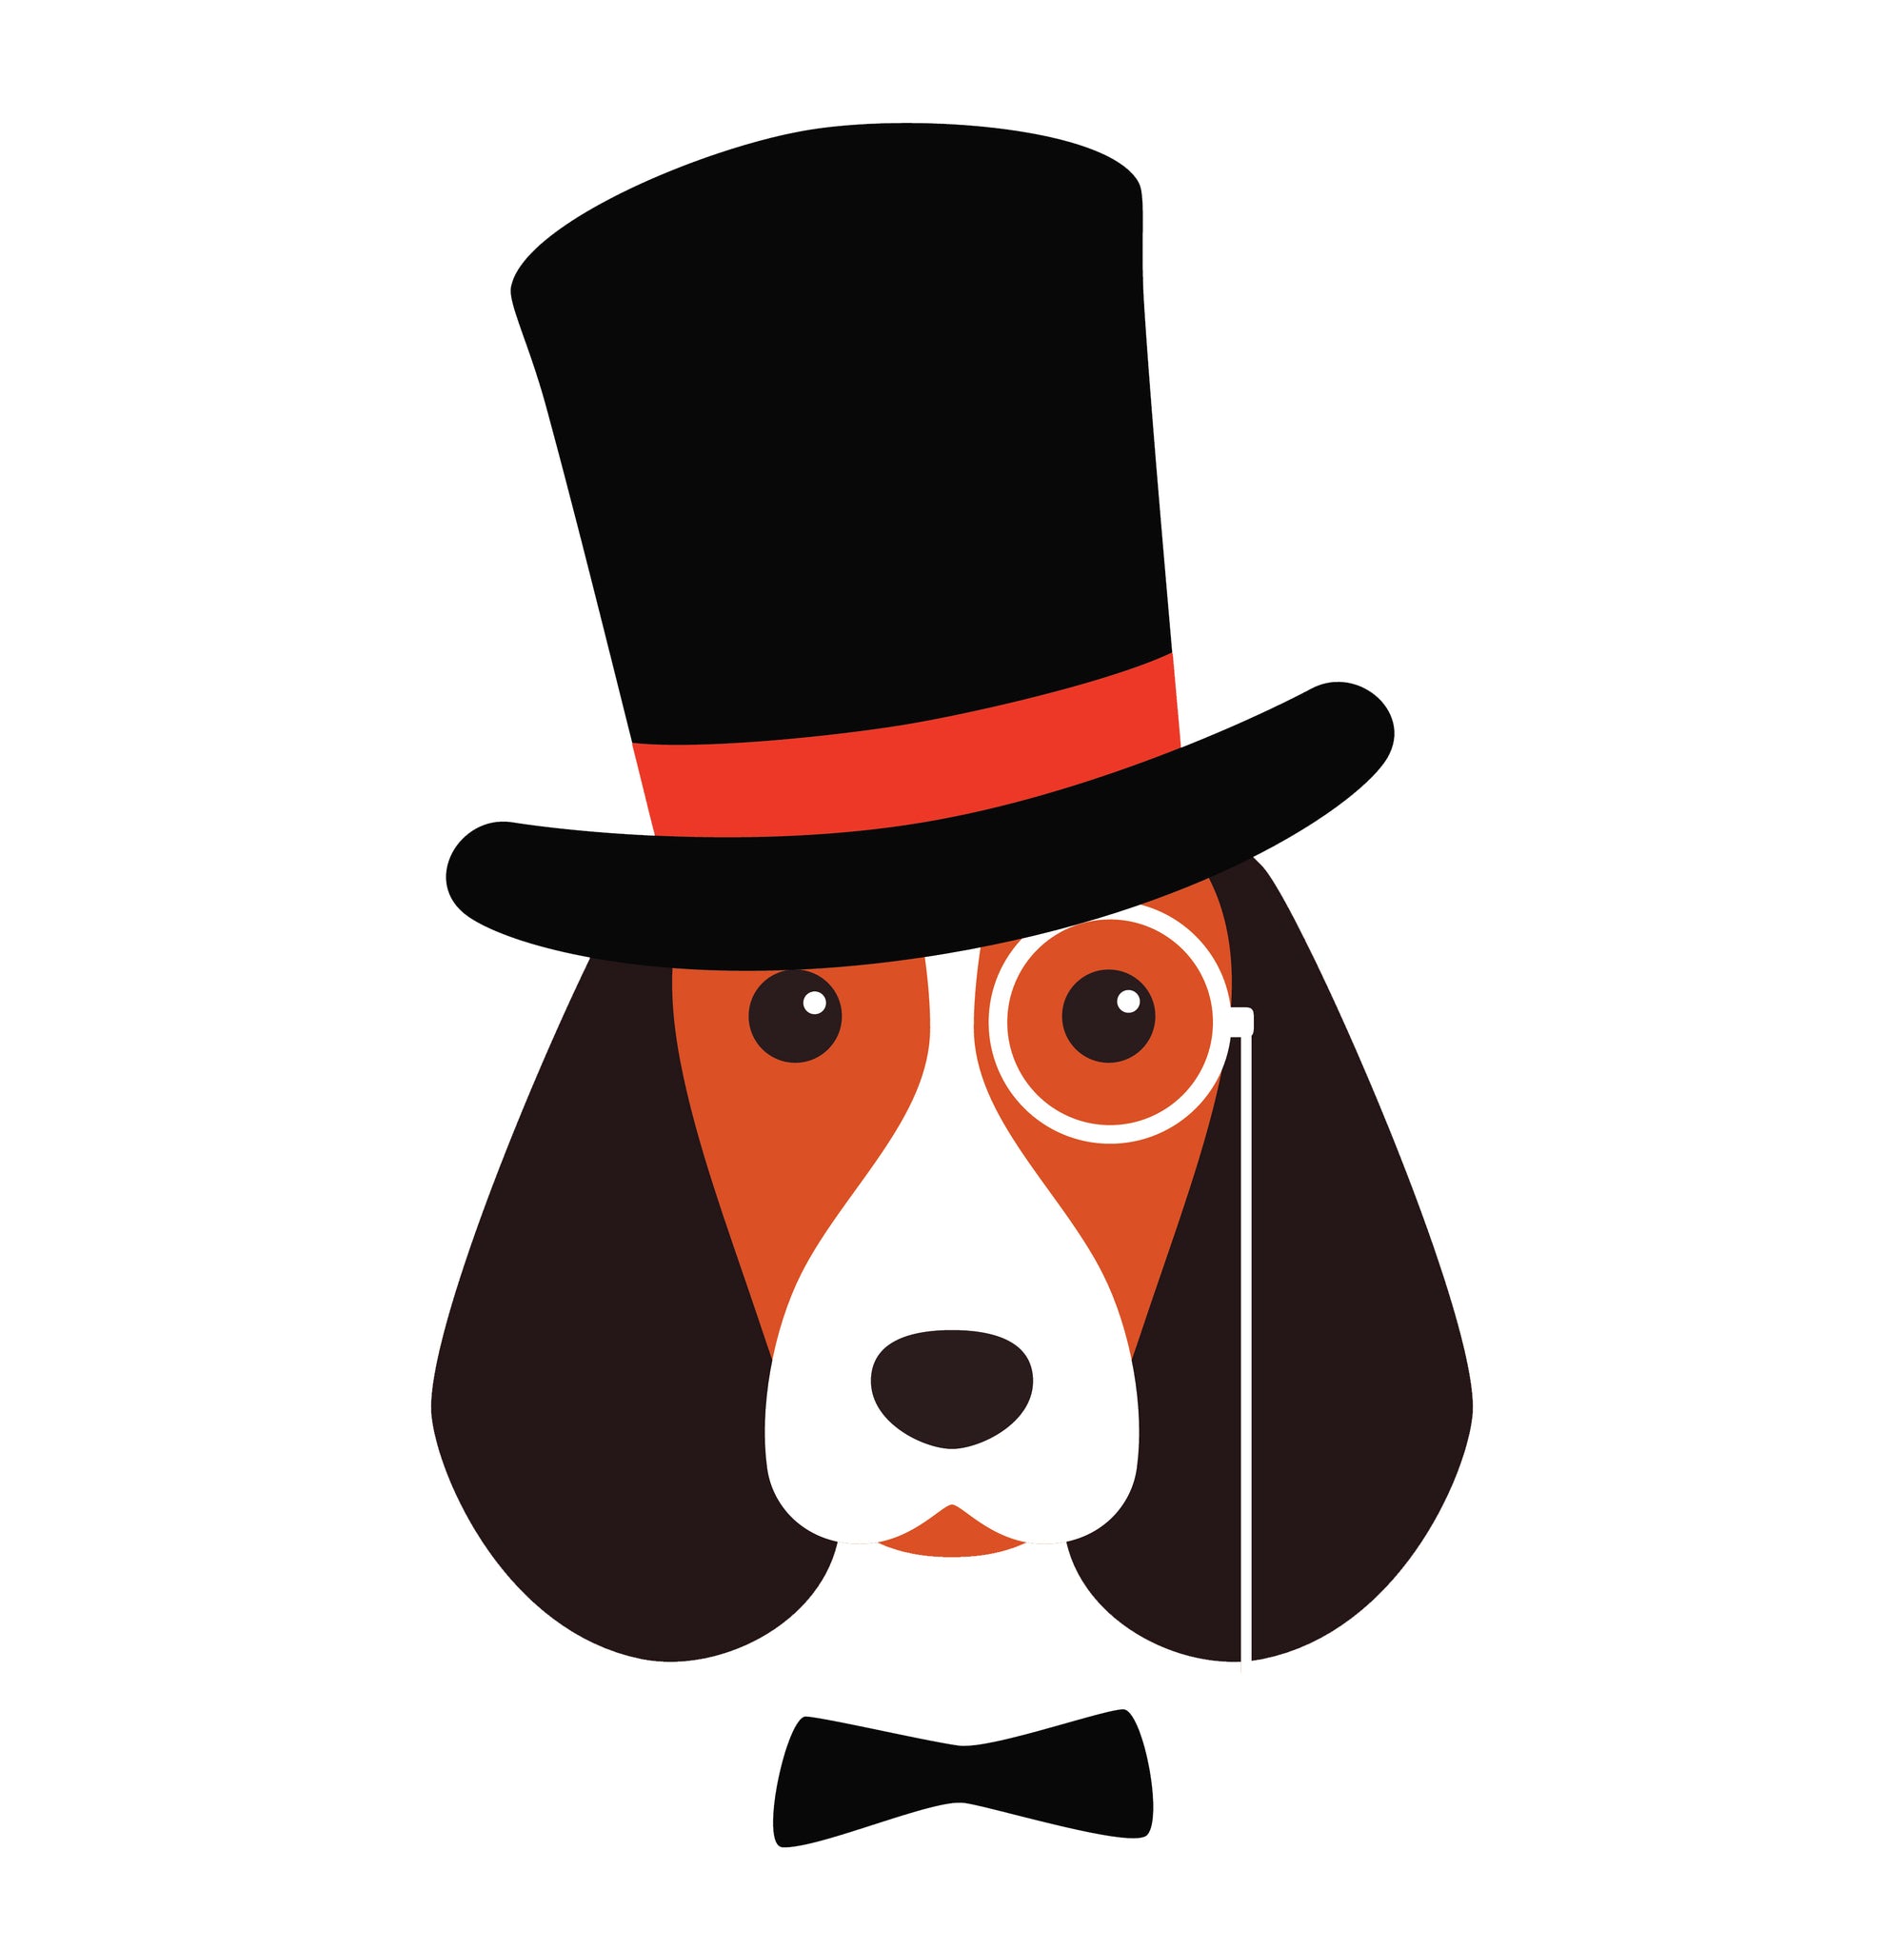 Fancy Old Fashioned Dog with Monocle and Bowtie Vinyl Decal Sticker